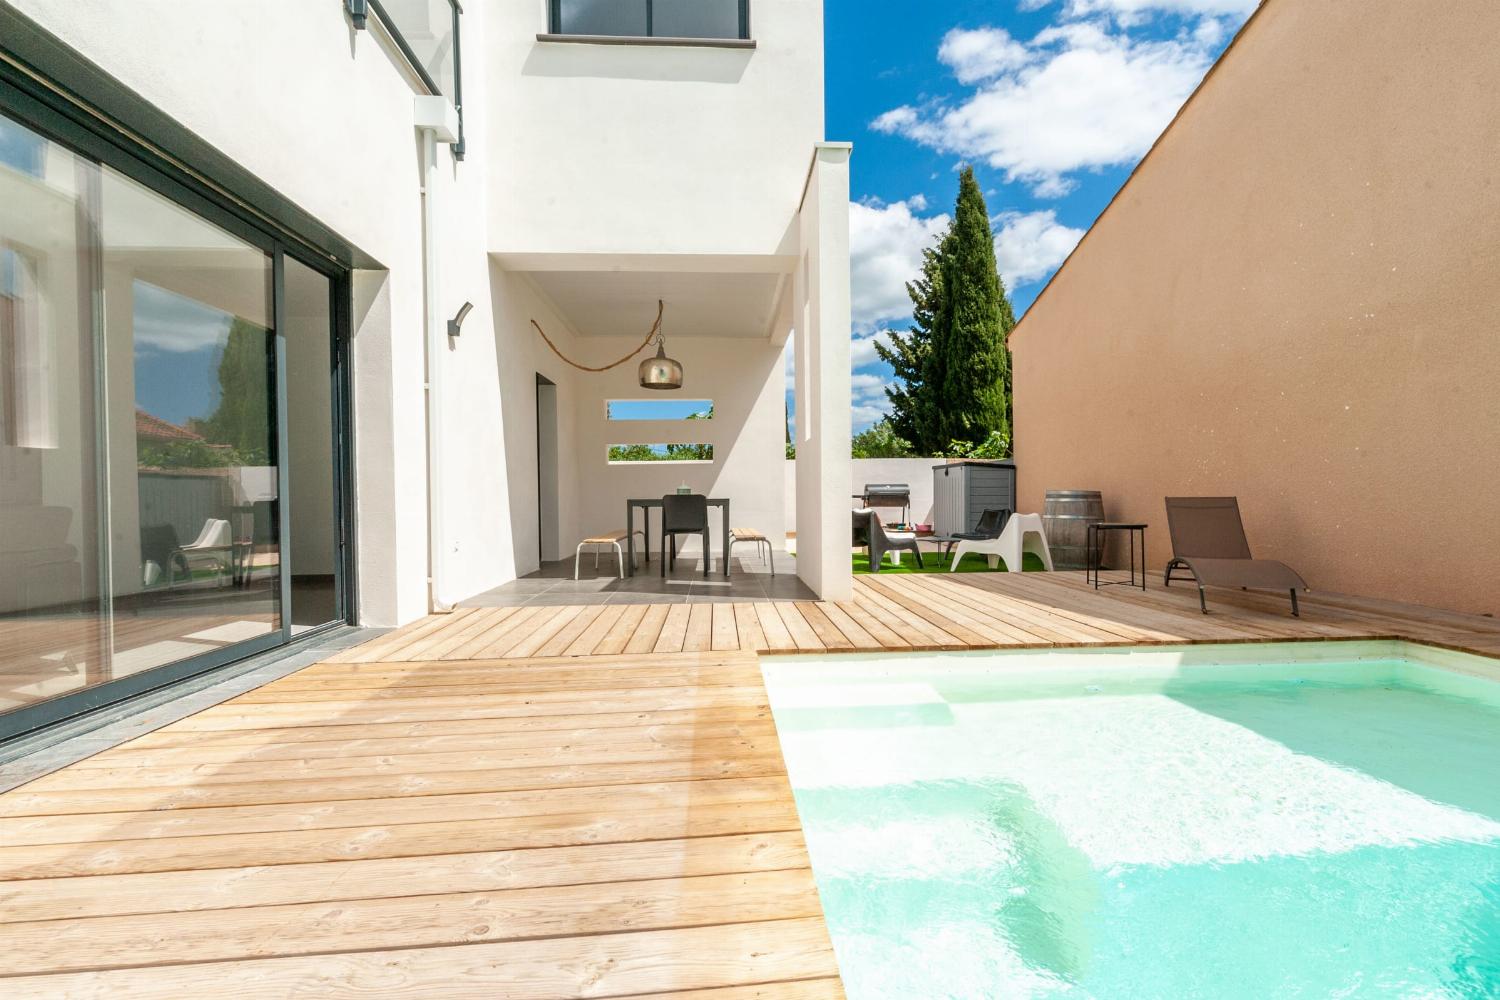 Holiday villa in South of France with private pool